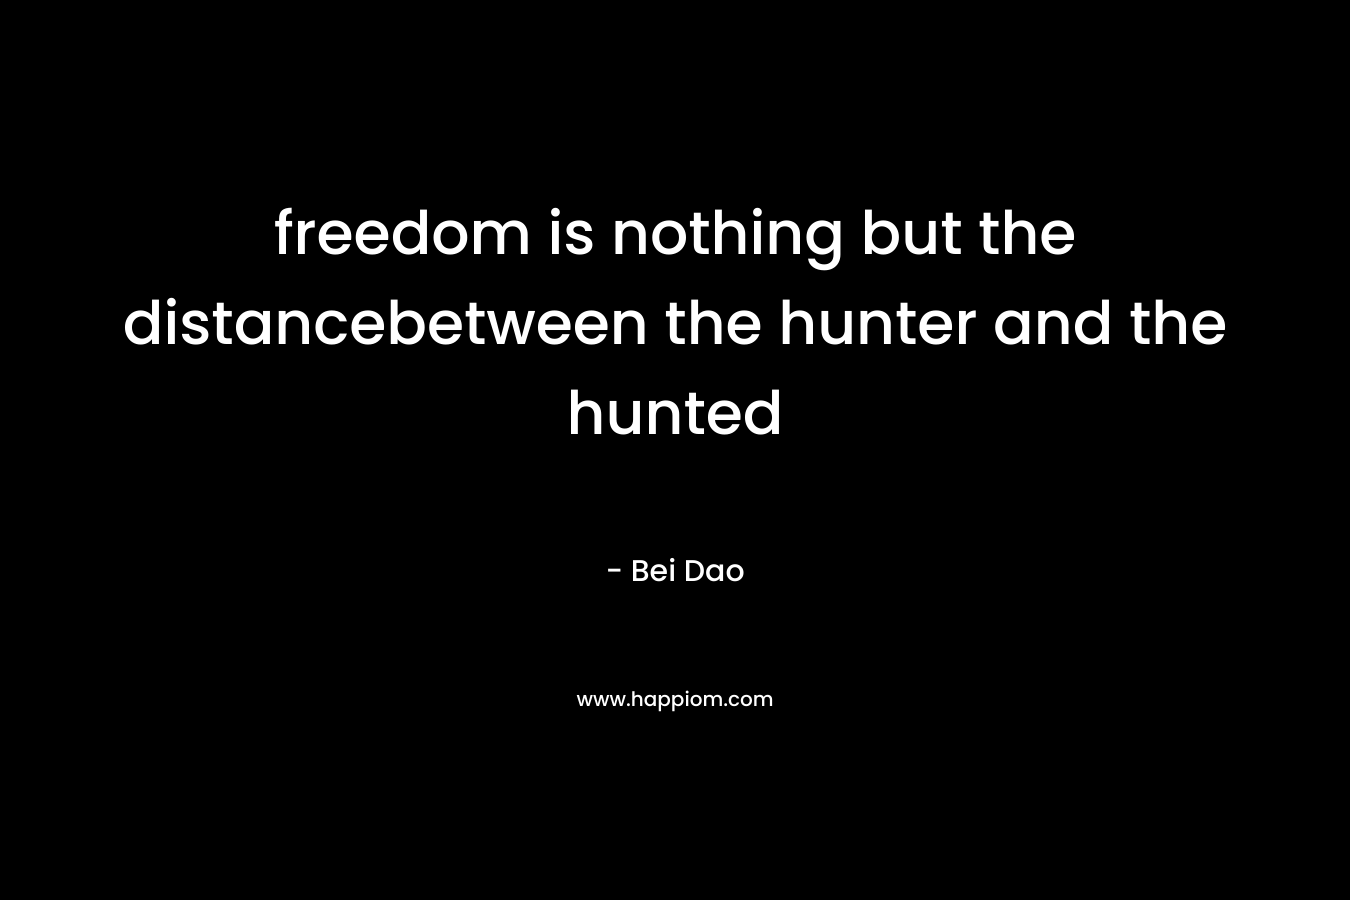 freedom is nothing but the distancebetween the hunter and the hunted